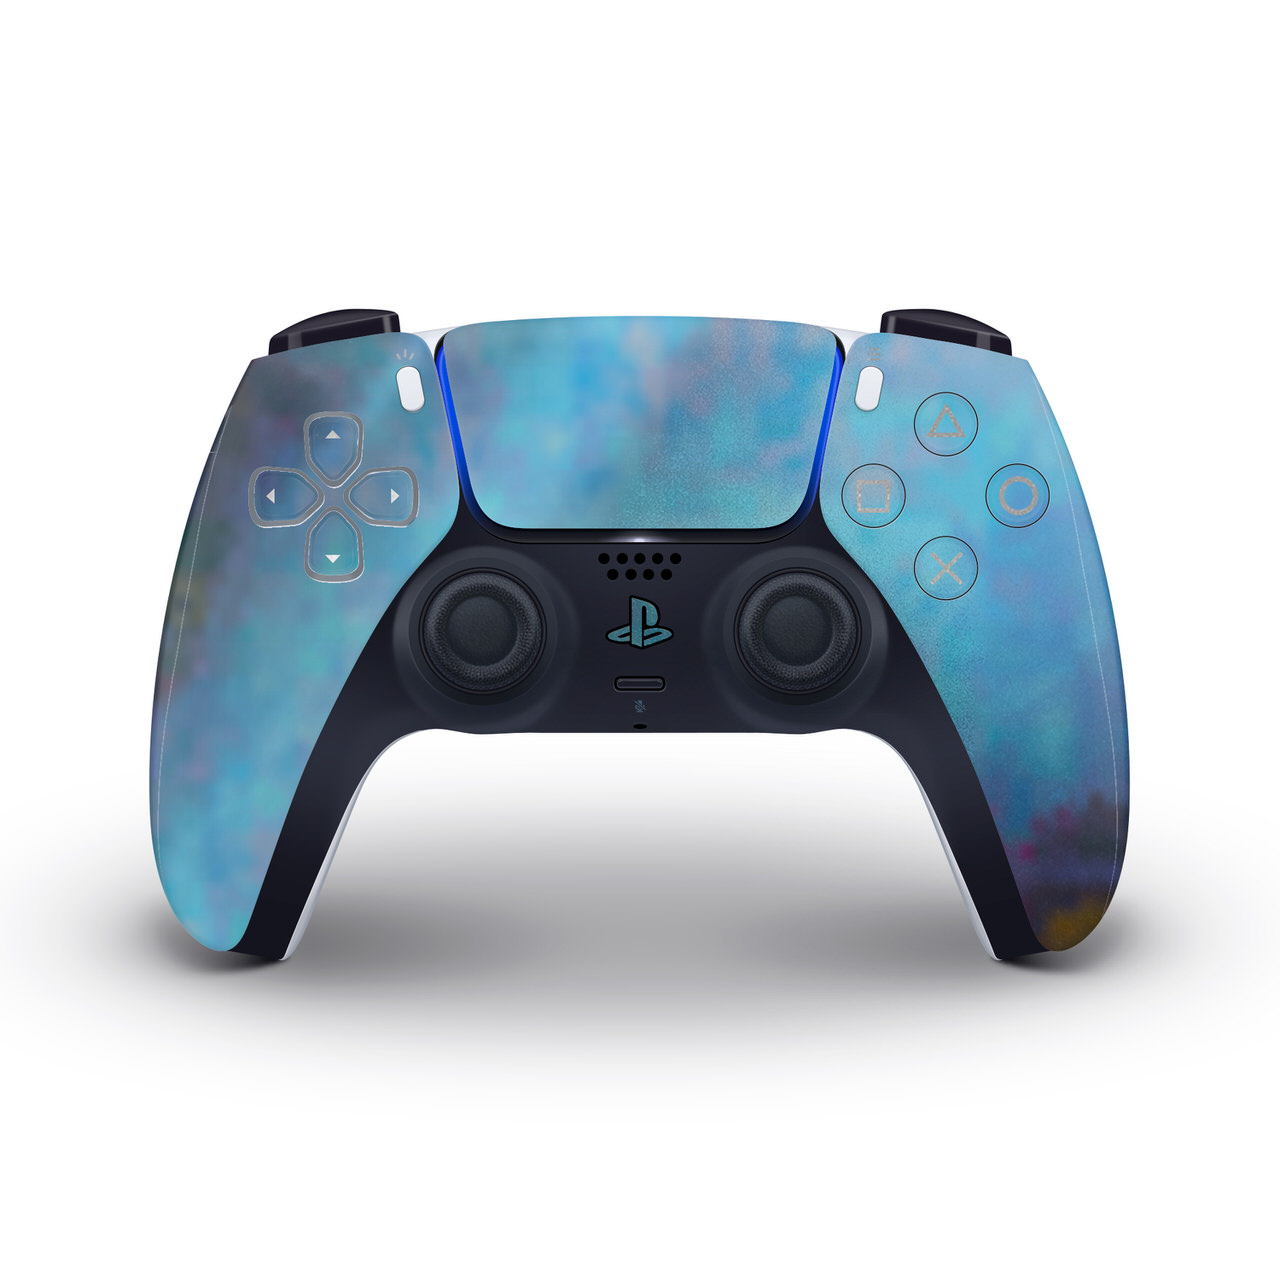 https://cdn11.bigcommerce.com/s-ahgfi493tw/images/stencil/original/products/8509/19907/Case_Hardened_Blue_Gem_Playstation_5_Controller_Anodized_Skin__31783.1692606922.jpg